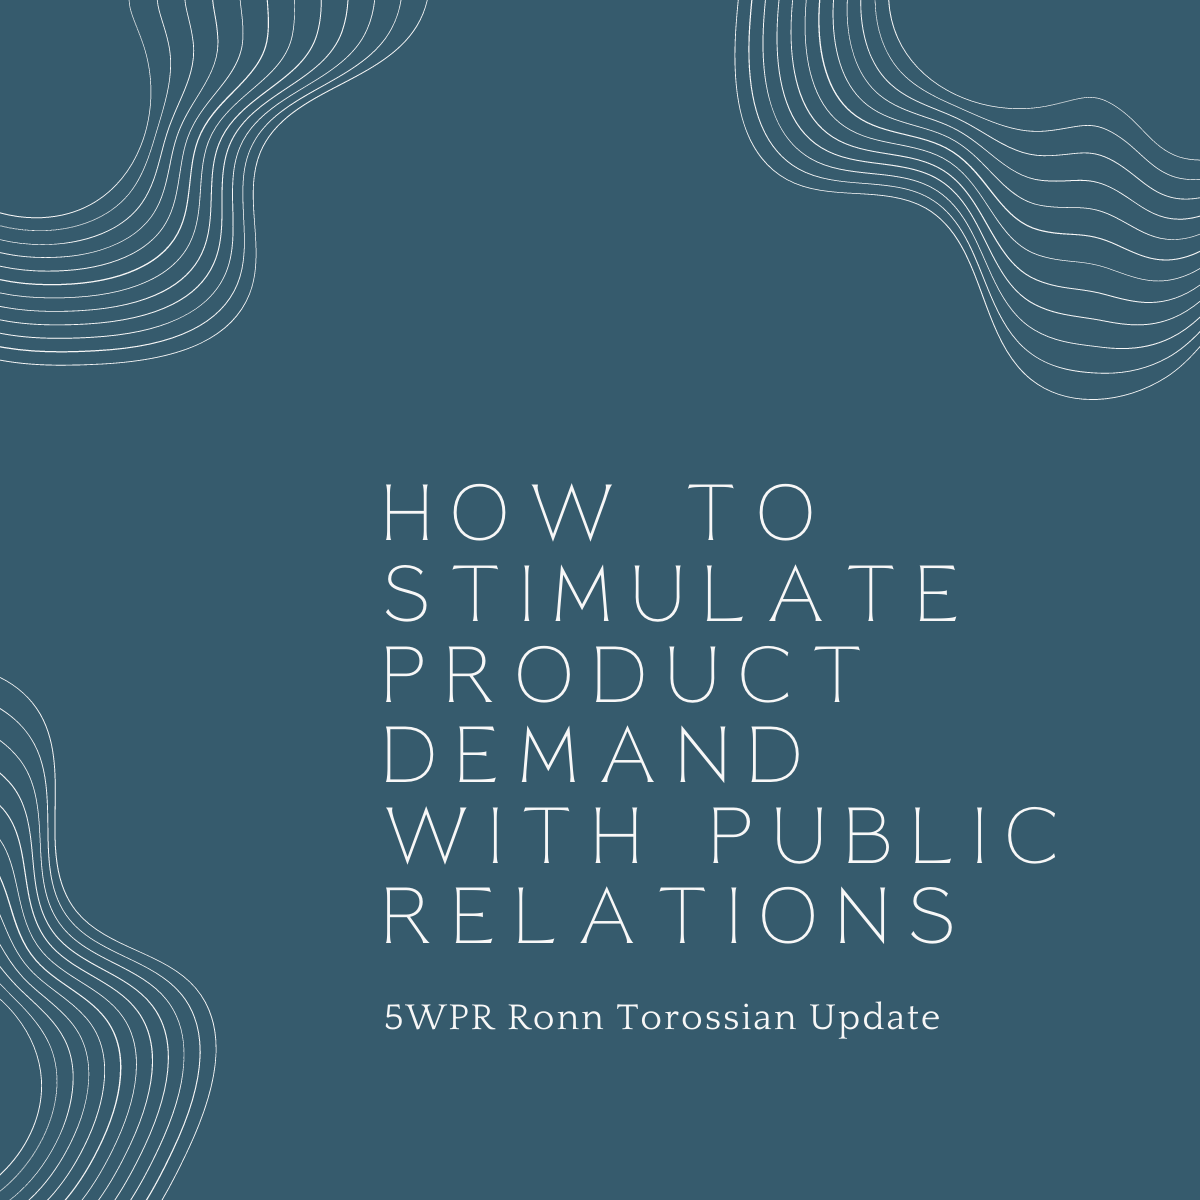 How to Stimulate Product Demand with Public Relations